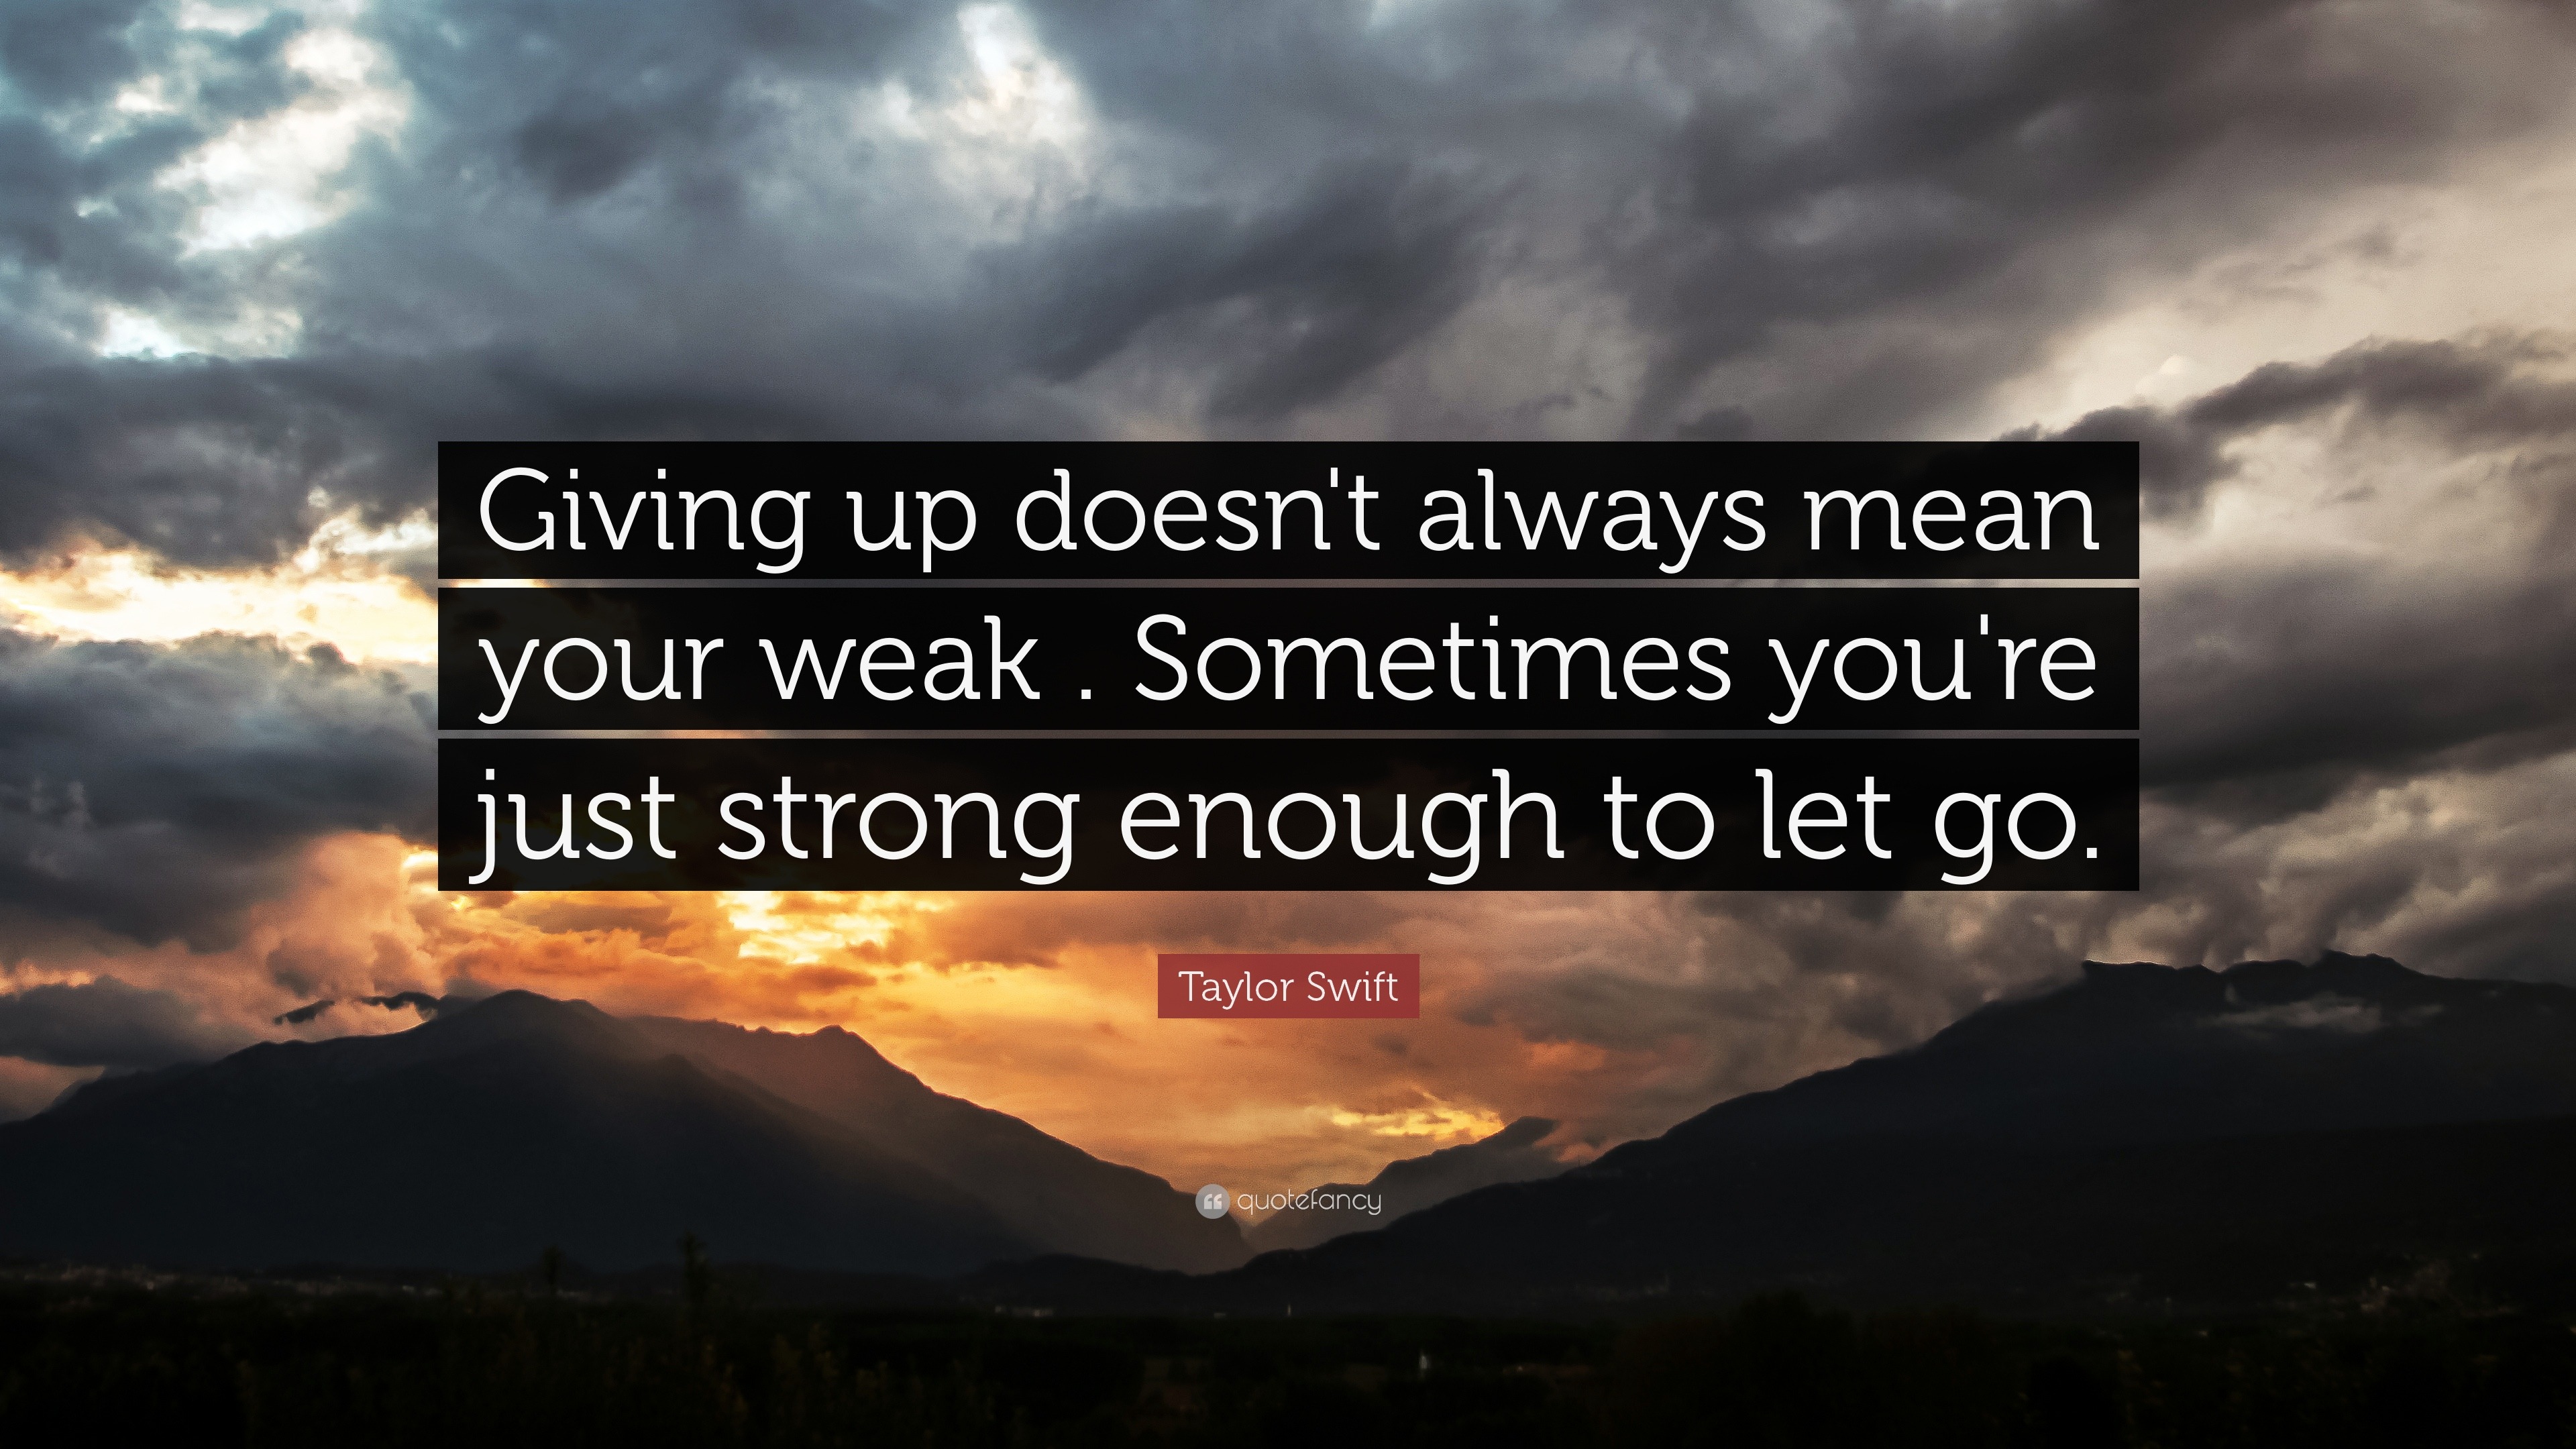 Taylor Swift quote: giving up doesn't always mean your weak sometimes your  just